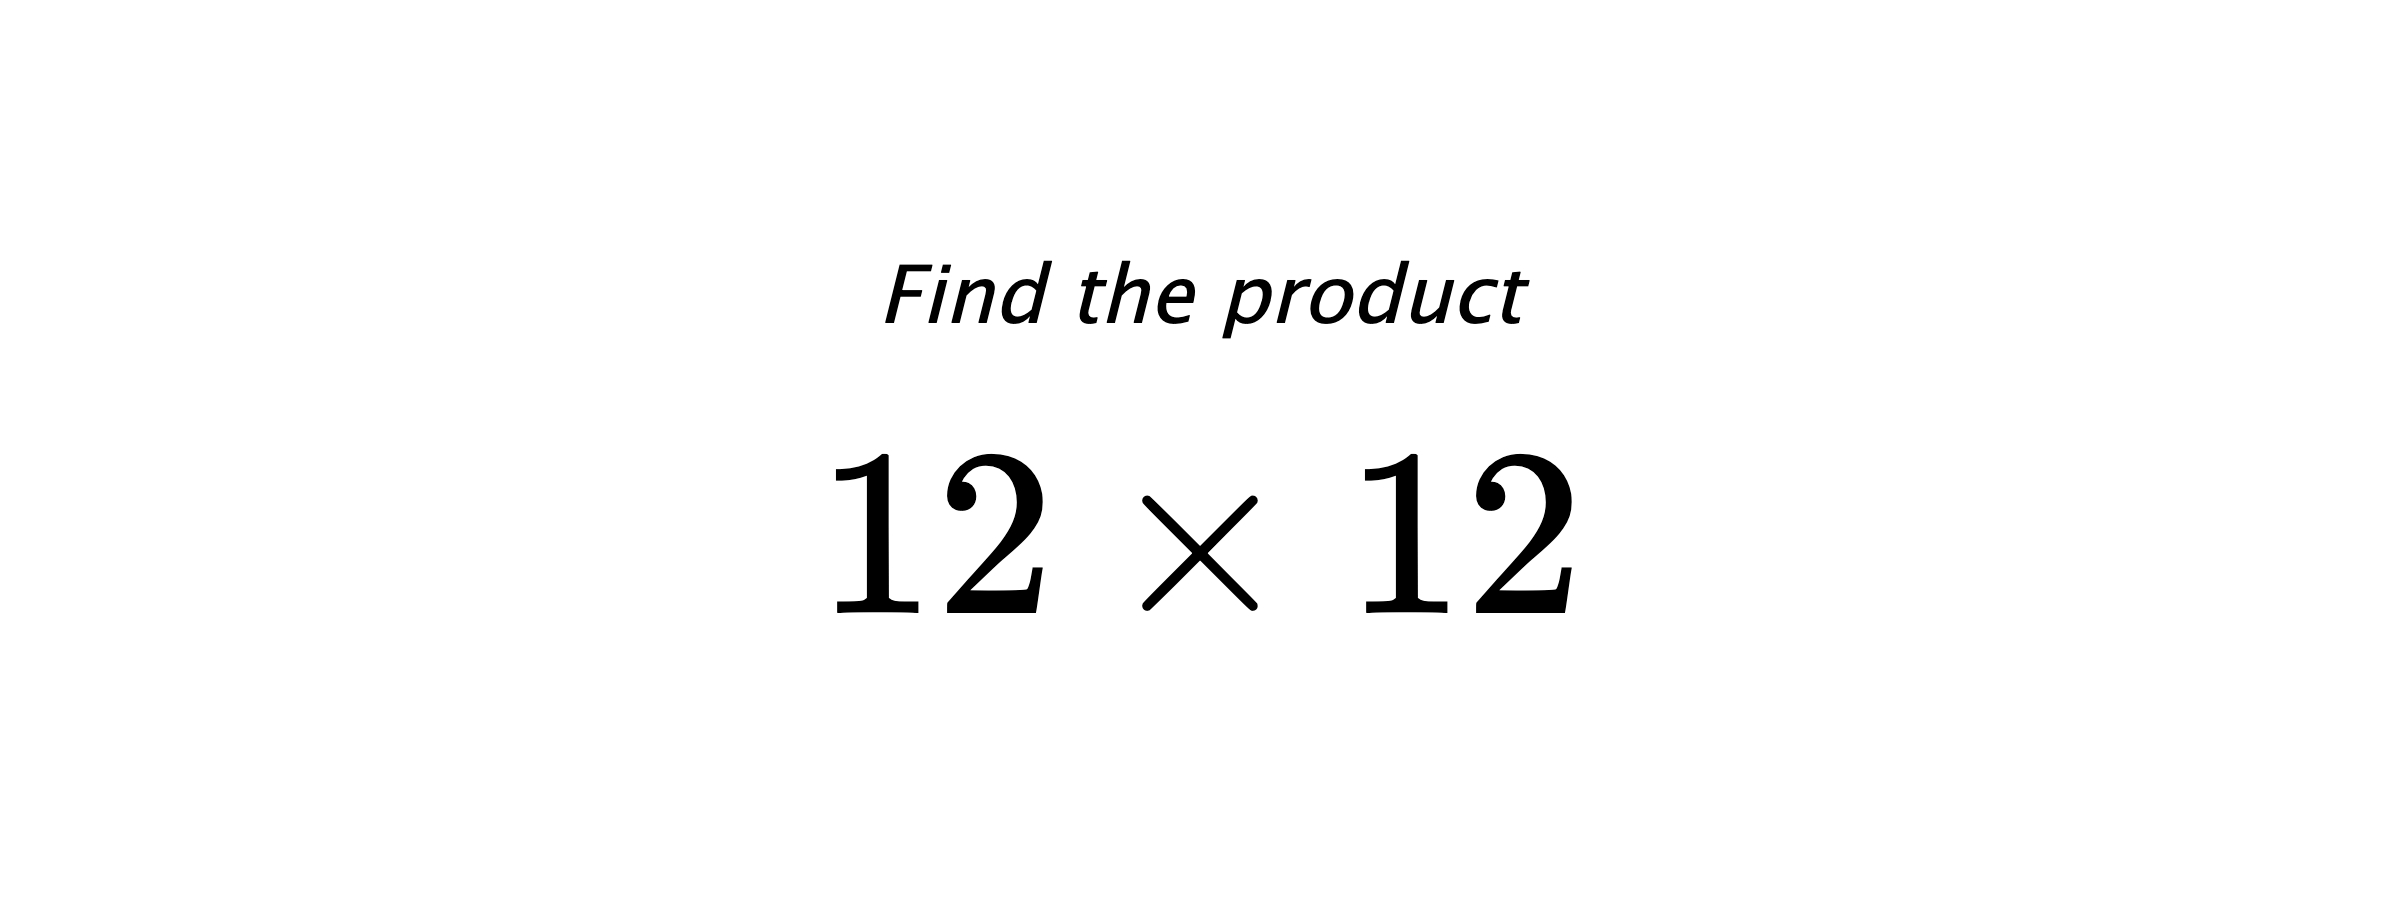 Find the product $ 12 \times 12 $